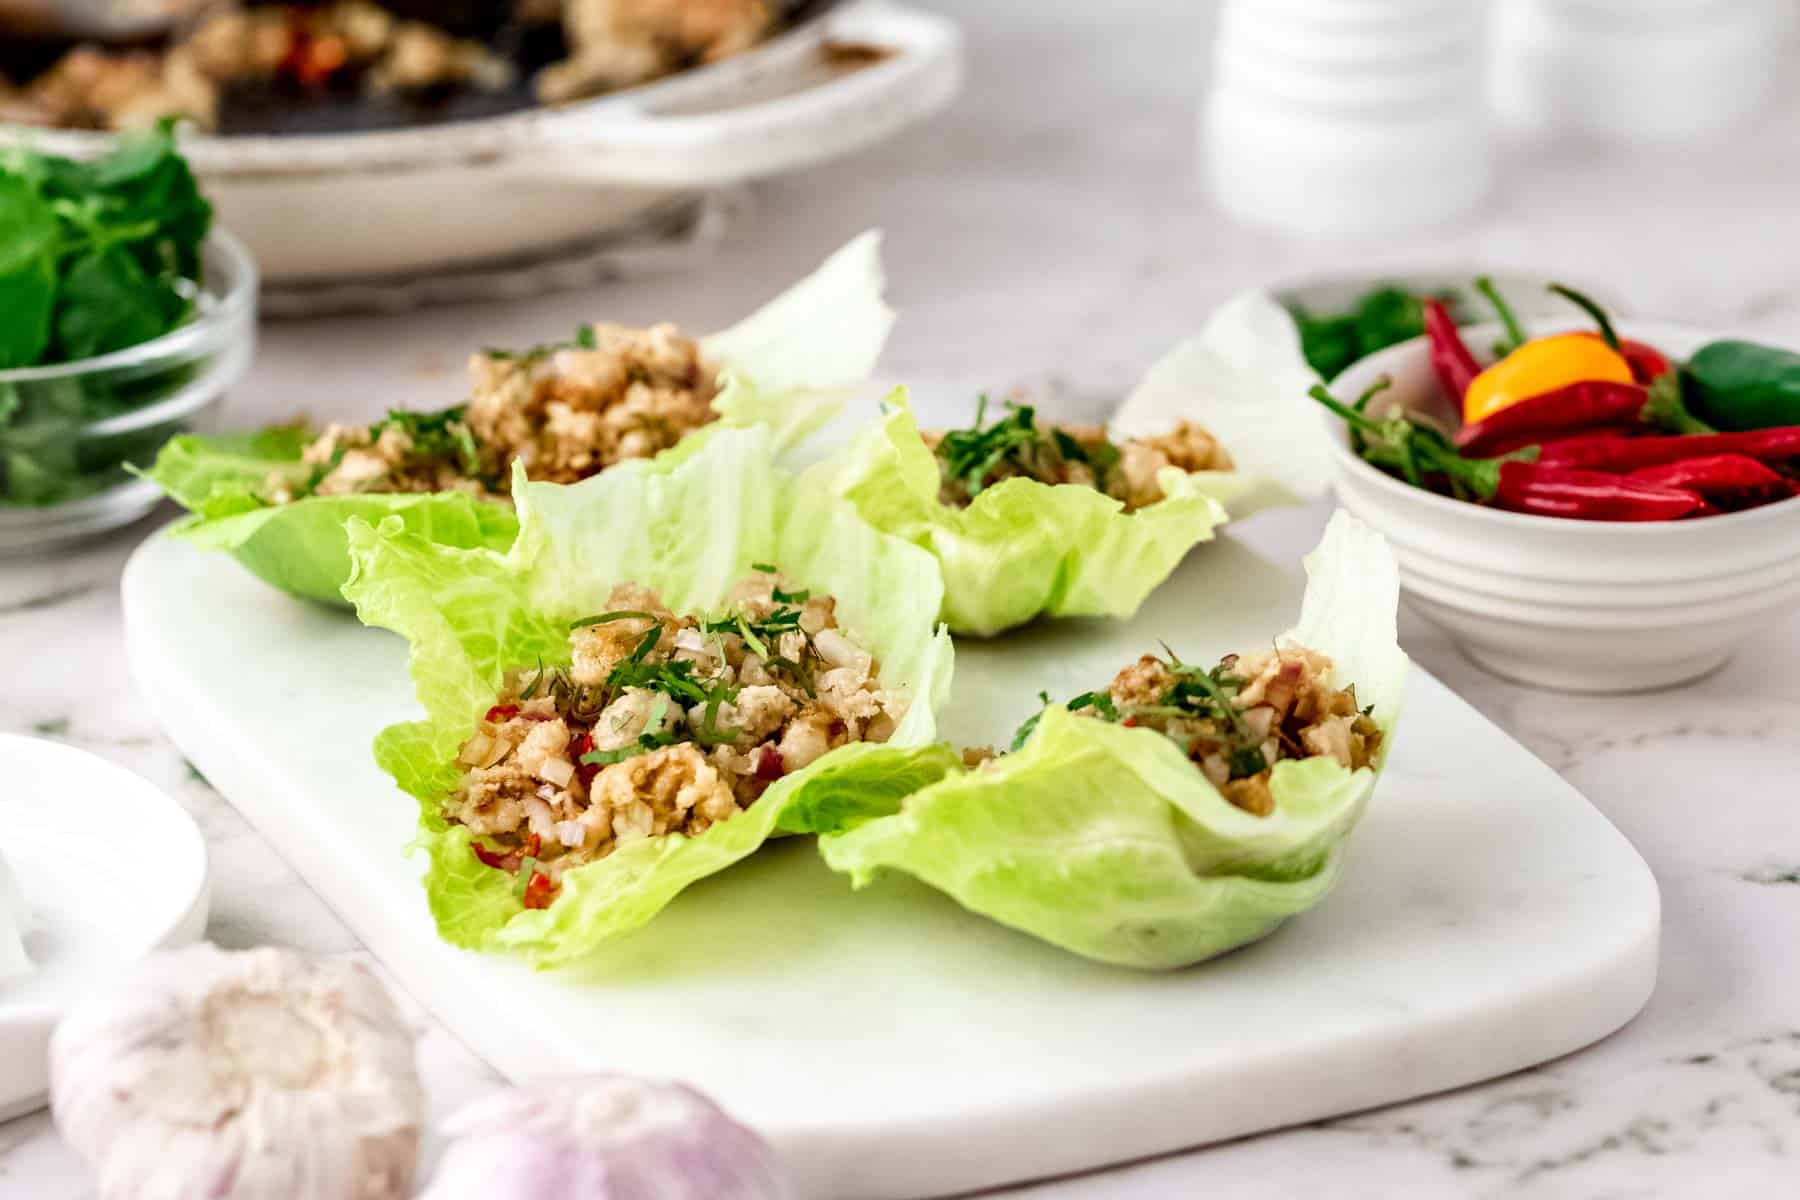 Thai larb chicken lettuce wraps on a white stone cutting board, next to a bowl of chili peppers and garlic bulbs.